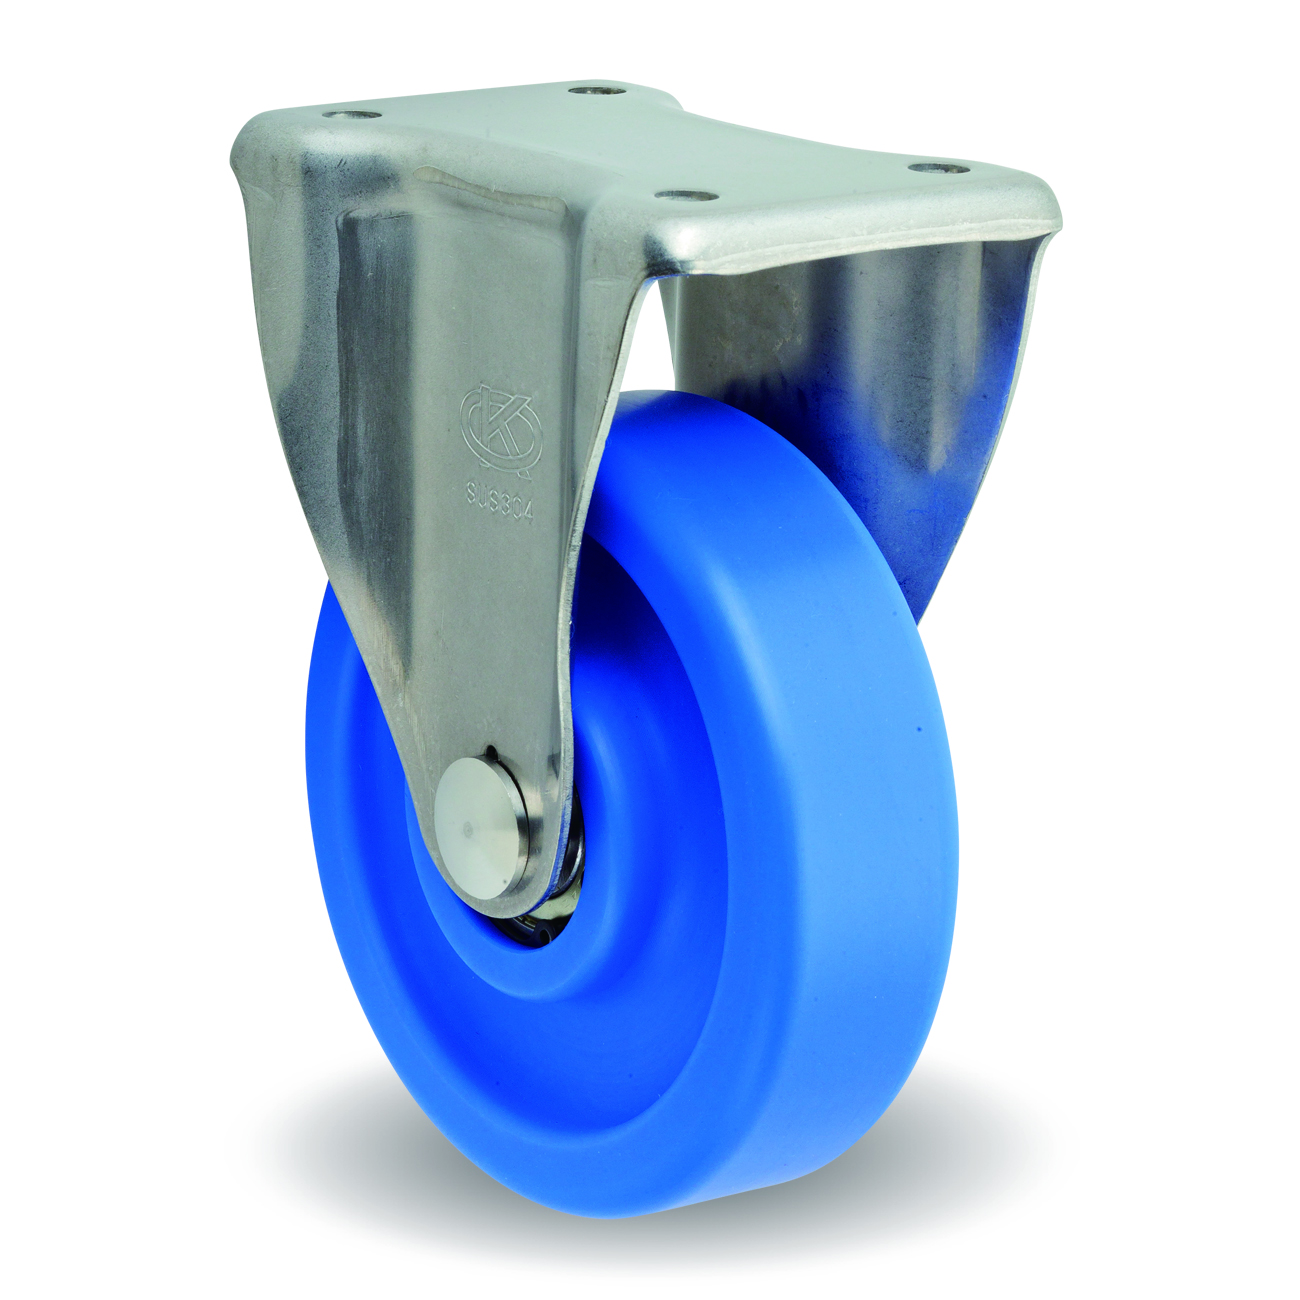 Casters - MC nylon with fixed plate and support, KS, MCB/KS series. MCBKS100